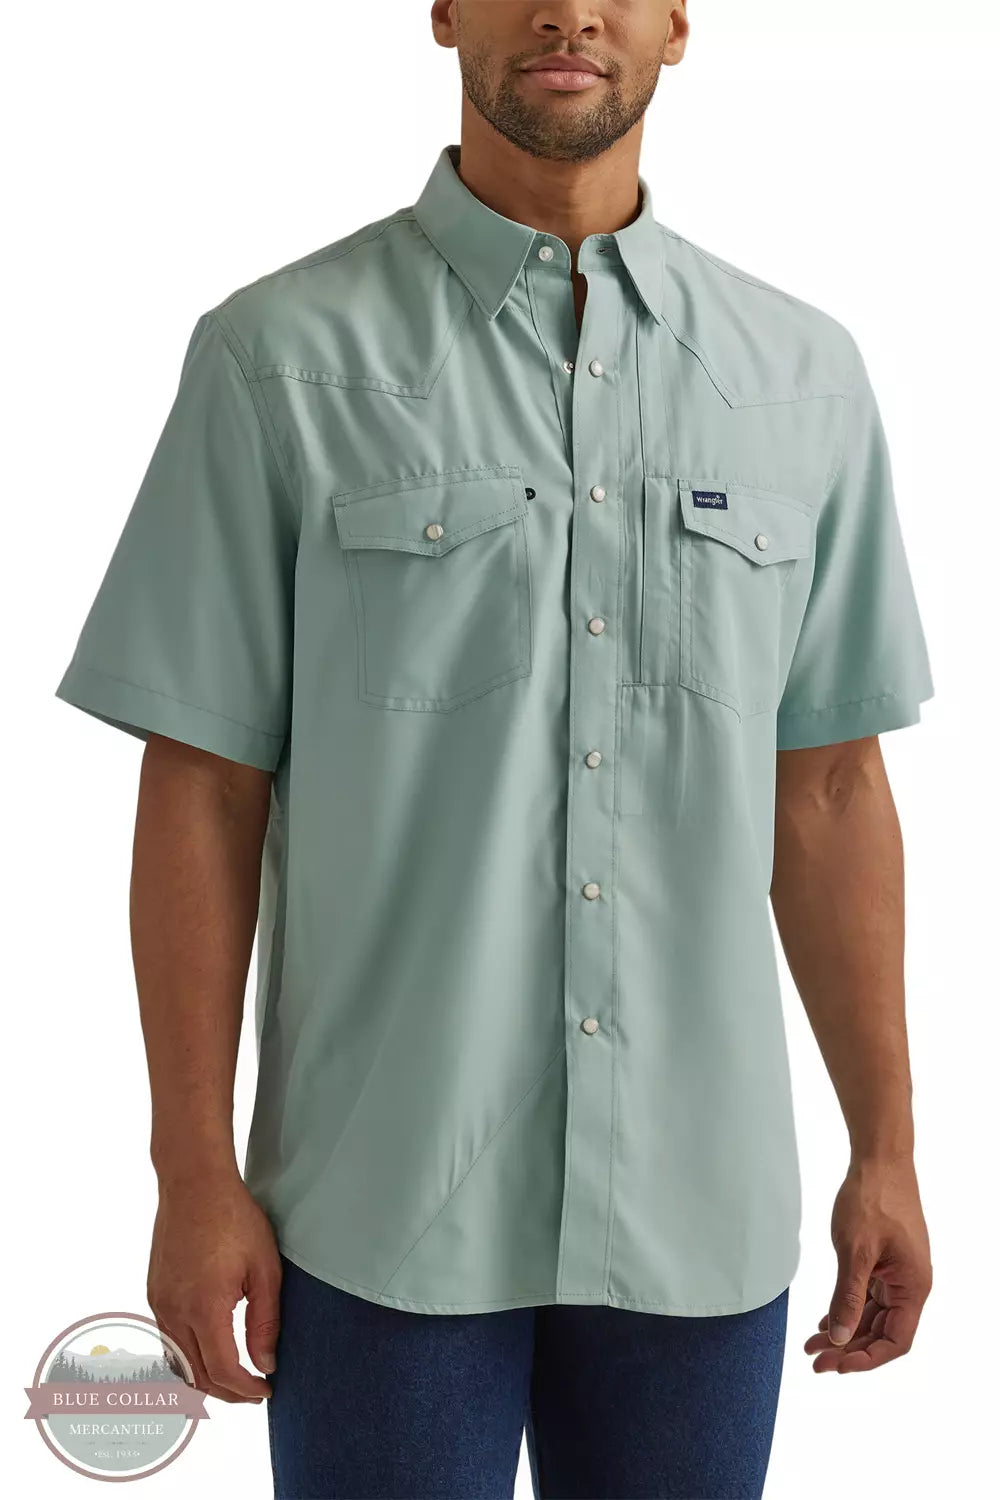 Wrangler 112344572 Performance Snap Shirt in Gray Front View